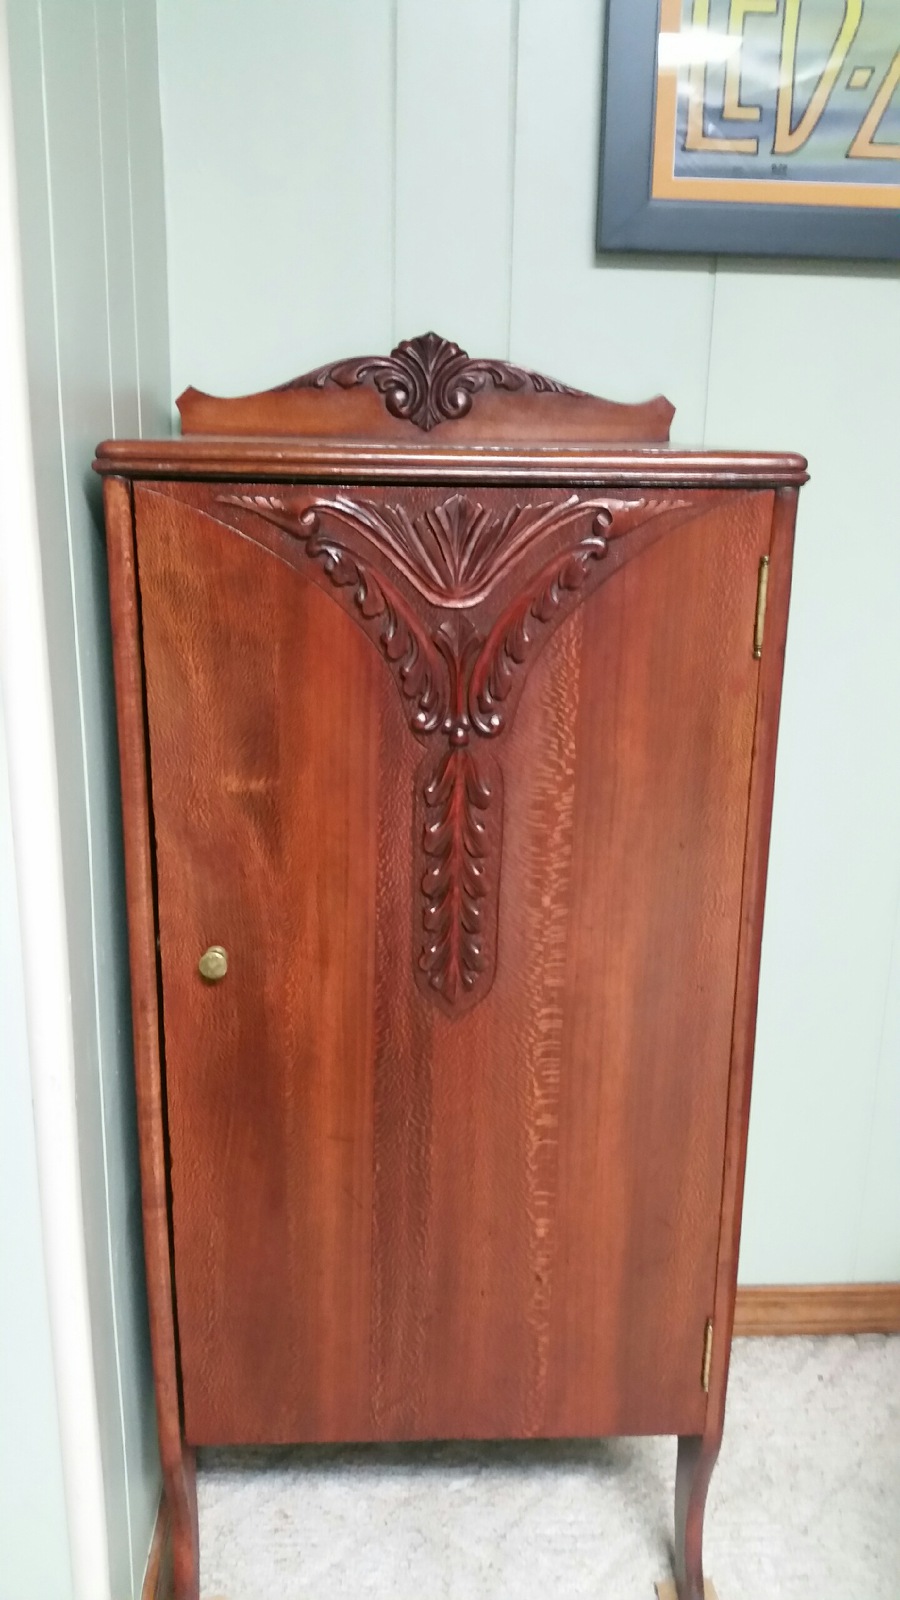 Vintage Record Storage Cabinet Info Please Help Antiques Board